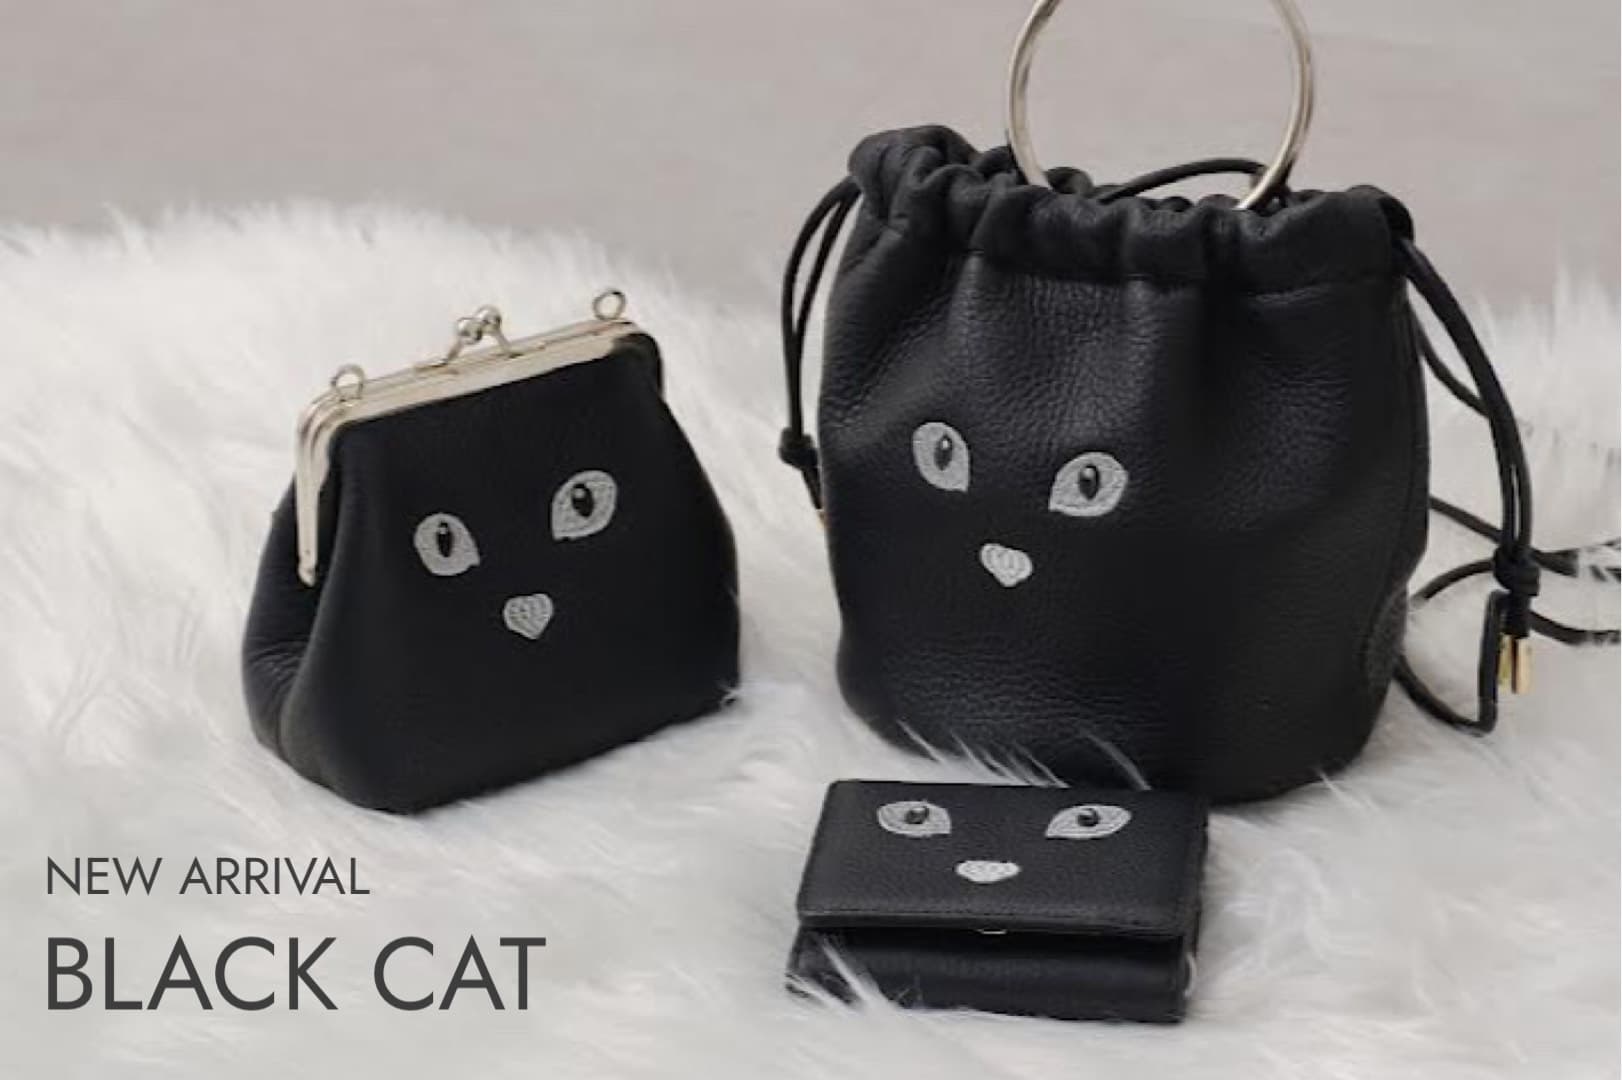 Pal collection 【NEW】黒猫シリーズが登場！